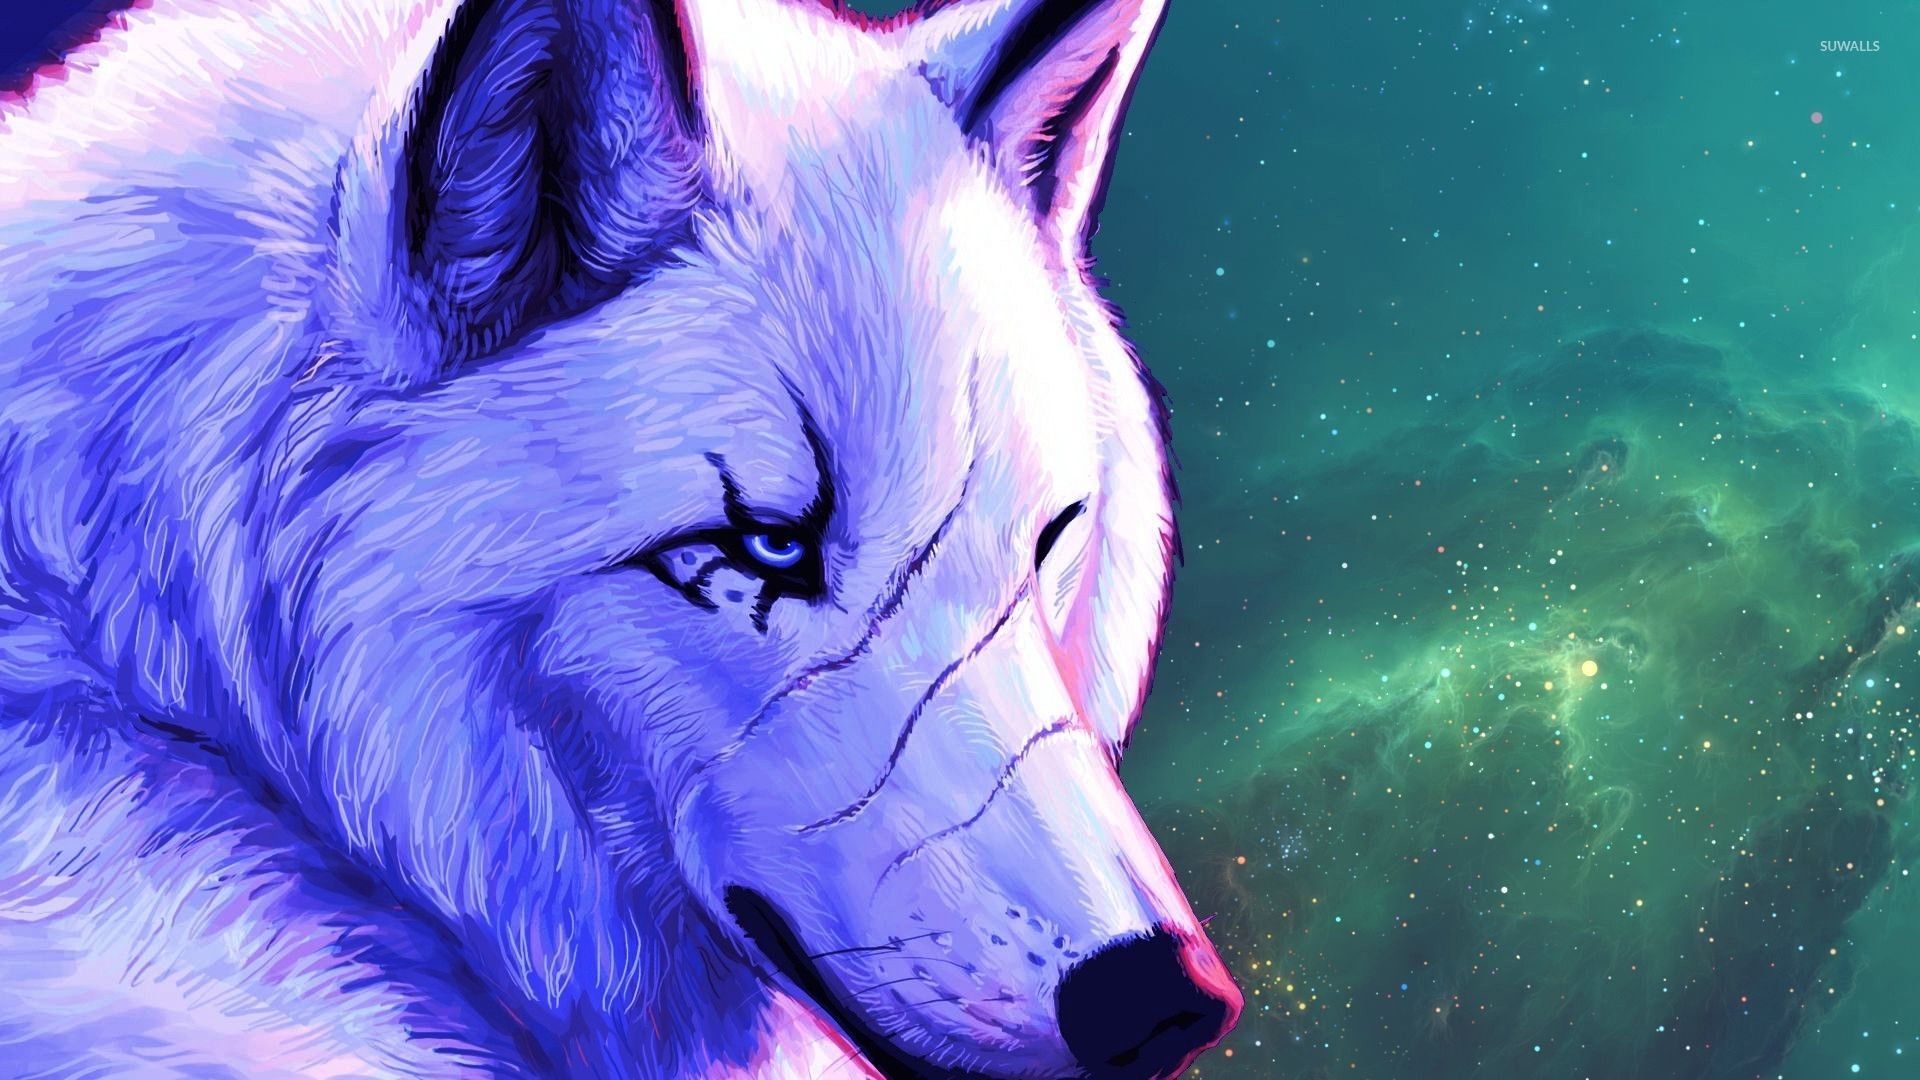 Wolf Mythical Galaxy Anime Wolf Mythical Galaxy Cool Backgrounds